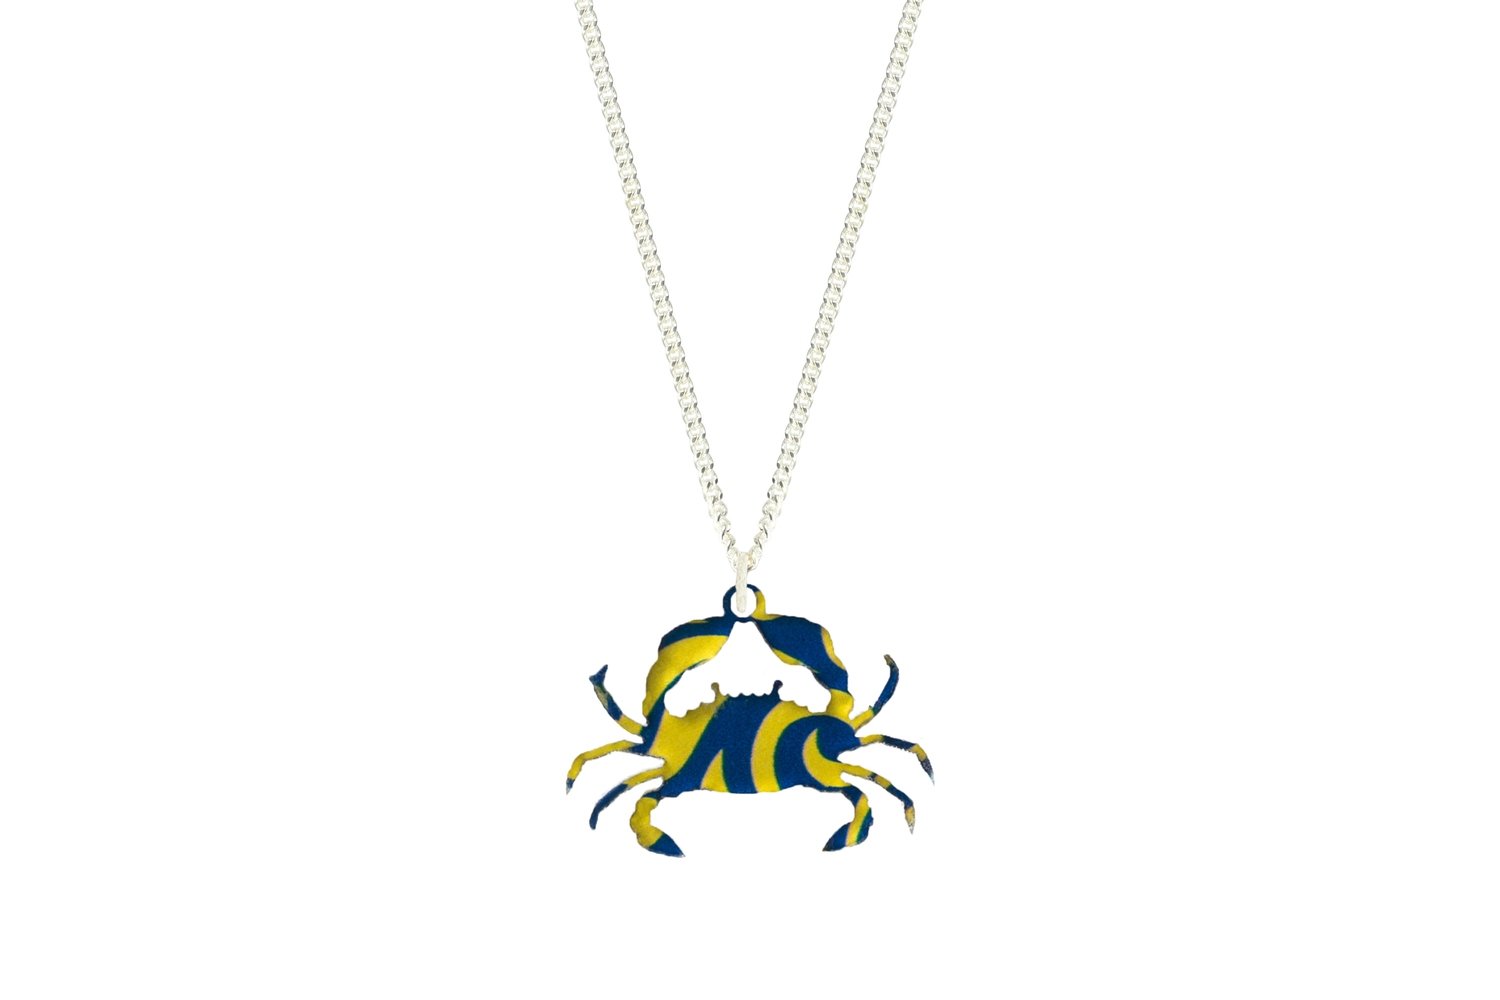 Crab Pendant Sculpted Style on Chain Necklace